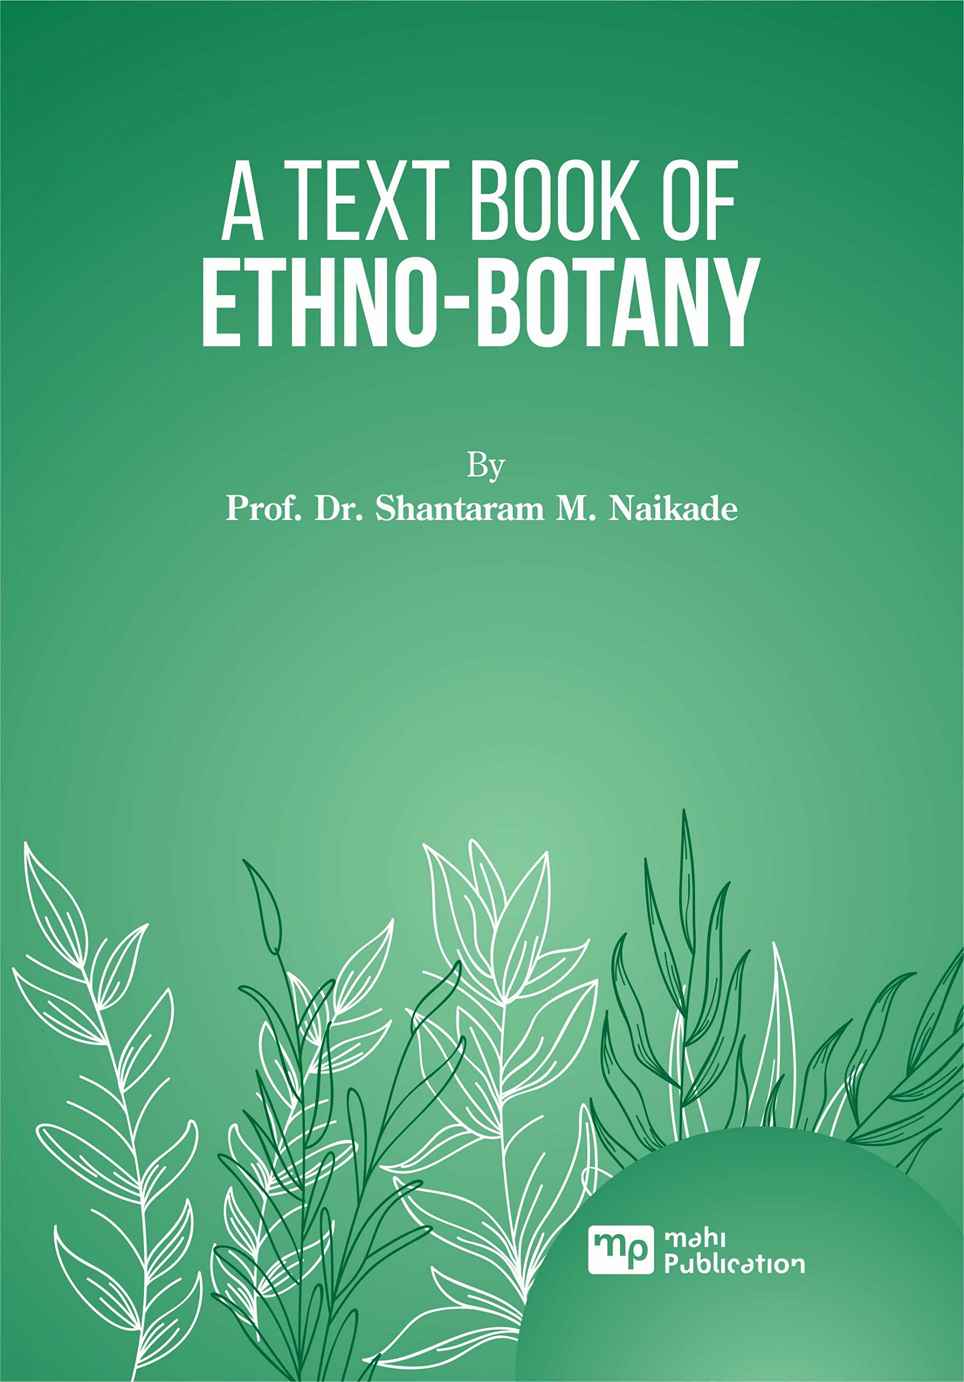 A text book of Ethno-botany